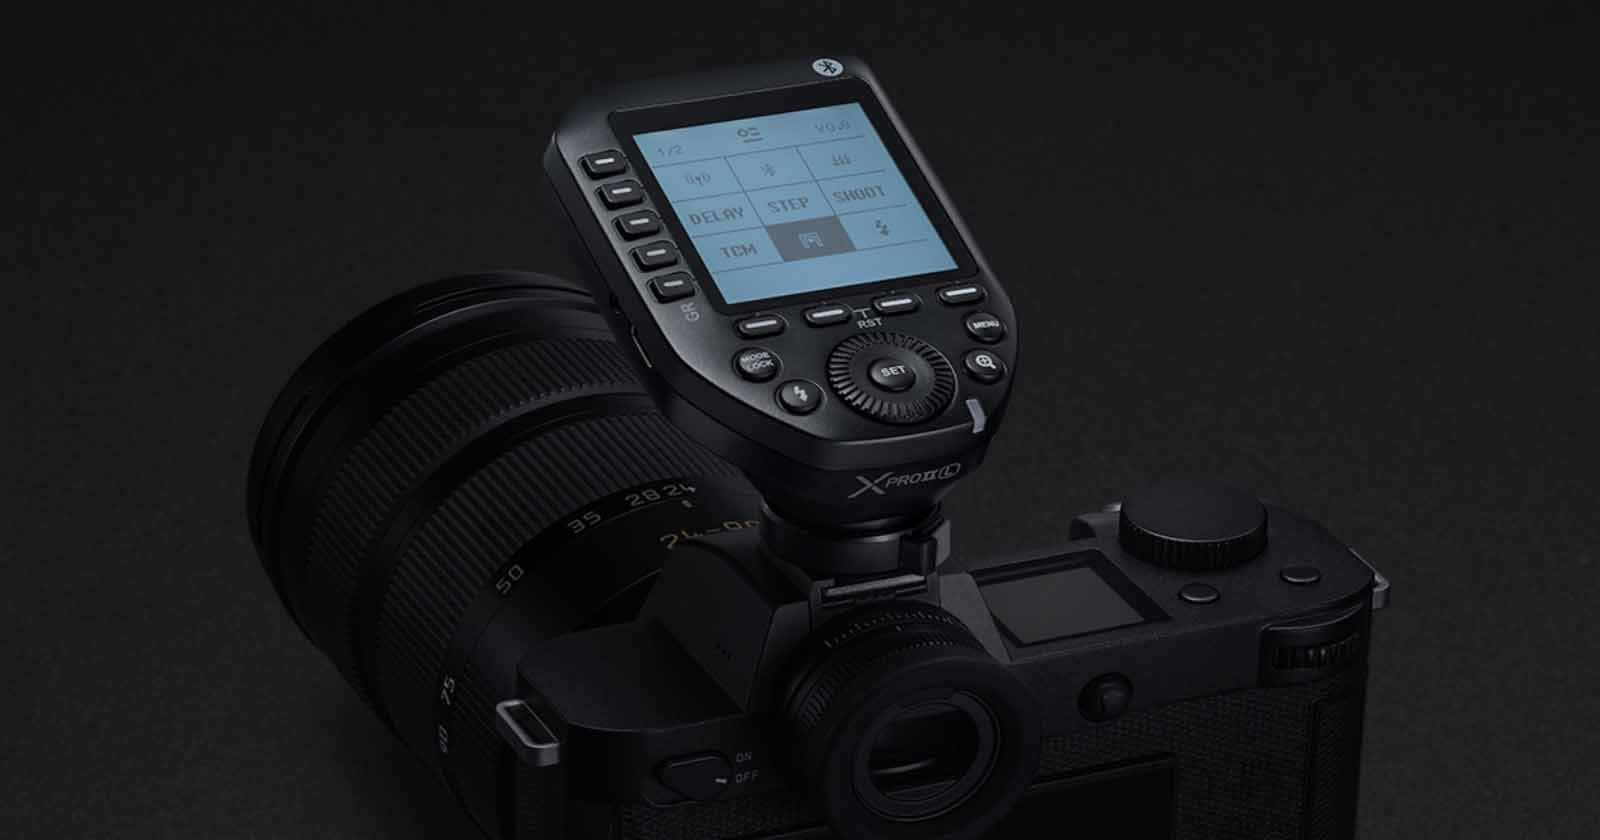 The New Godox XProIIL is a Wireless Flash Trigger for Leica Cameras